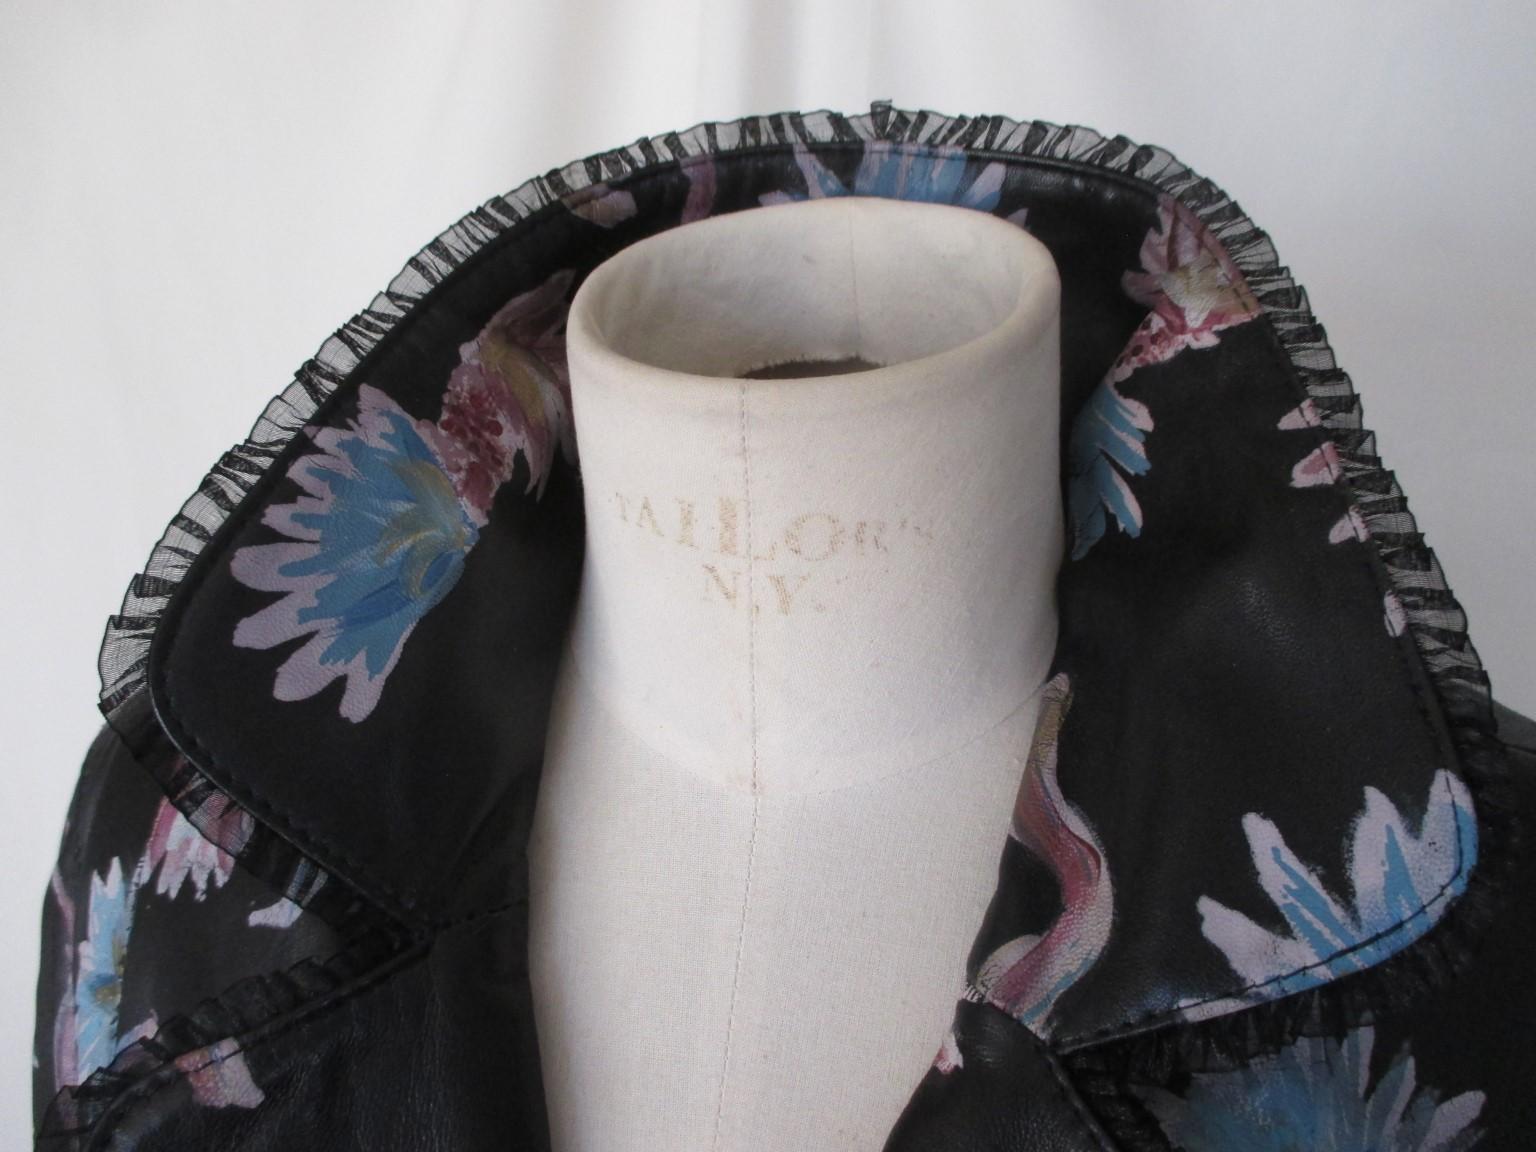 This is an exclusive black leather handpainted blue/pink flowers jacket

We offer more exclusive vintage items, view our frontstore.

Details:
Made of black leather, with blue and pink flowers
Embroidered with lace
With 3 Sr logo buttons, 2 pockets,